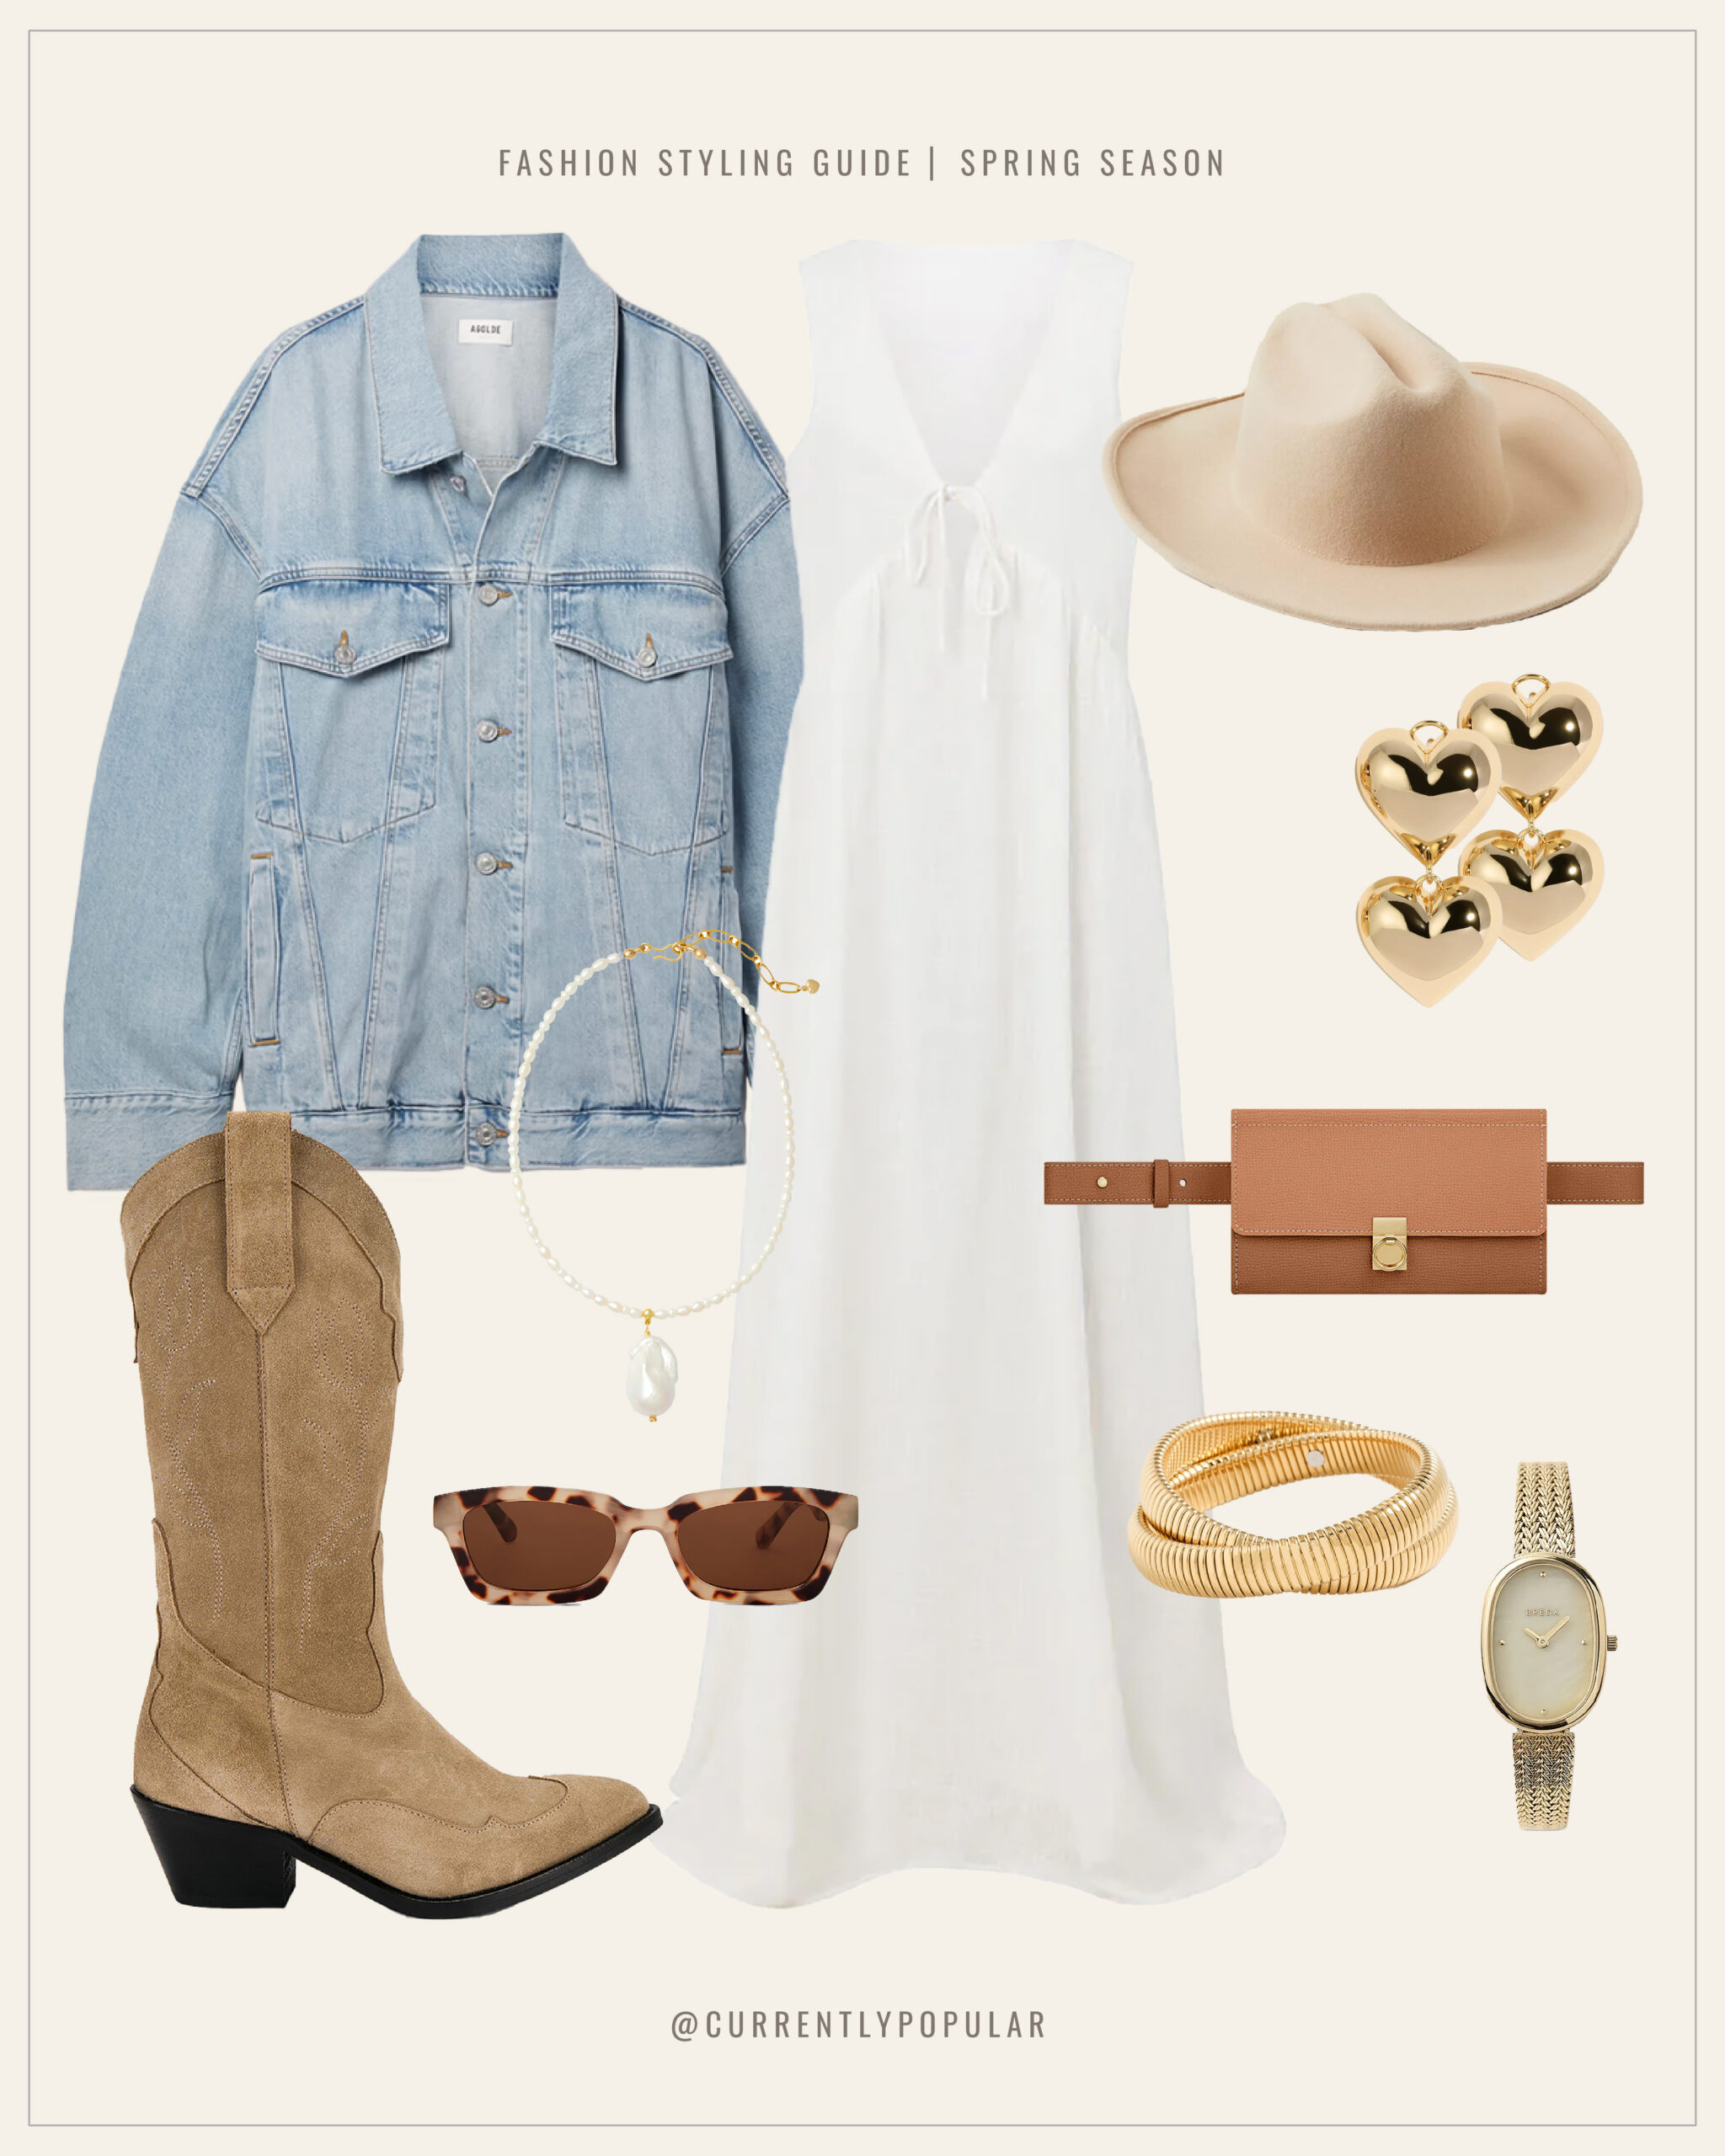 This is an image of a coastal cowgirl inspired outfit. It features a white long dress, denim oversized jacket, felt cowboy hat, suede cowboy boots, leather crossbody bag, gold jewelry & sunglasses.